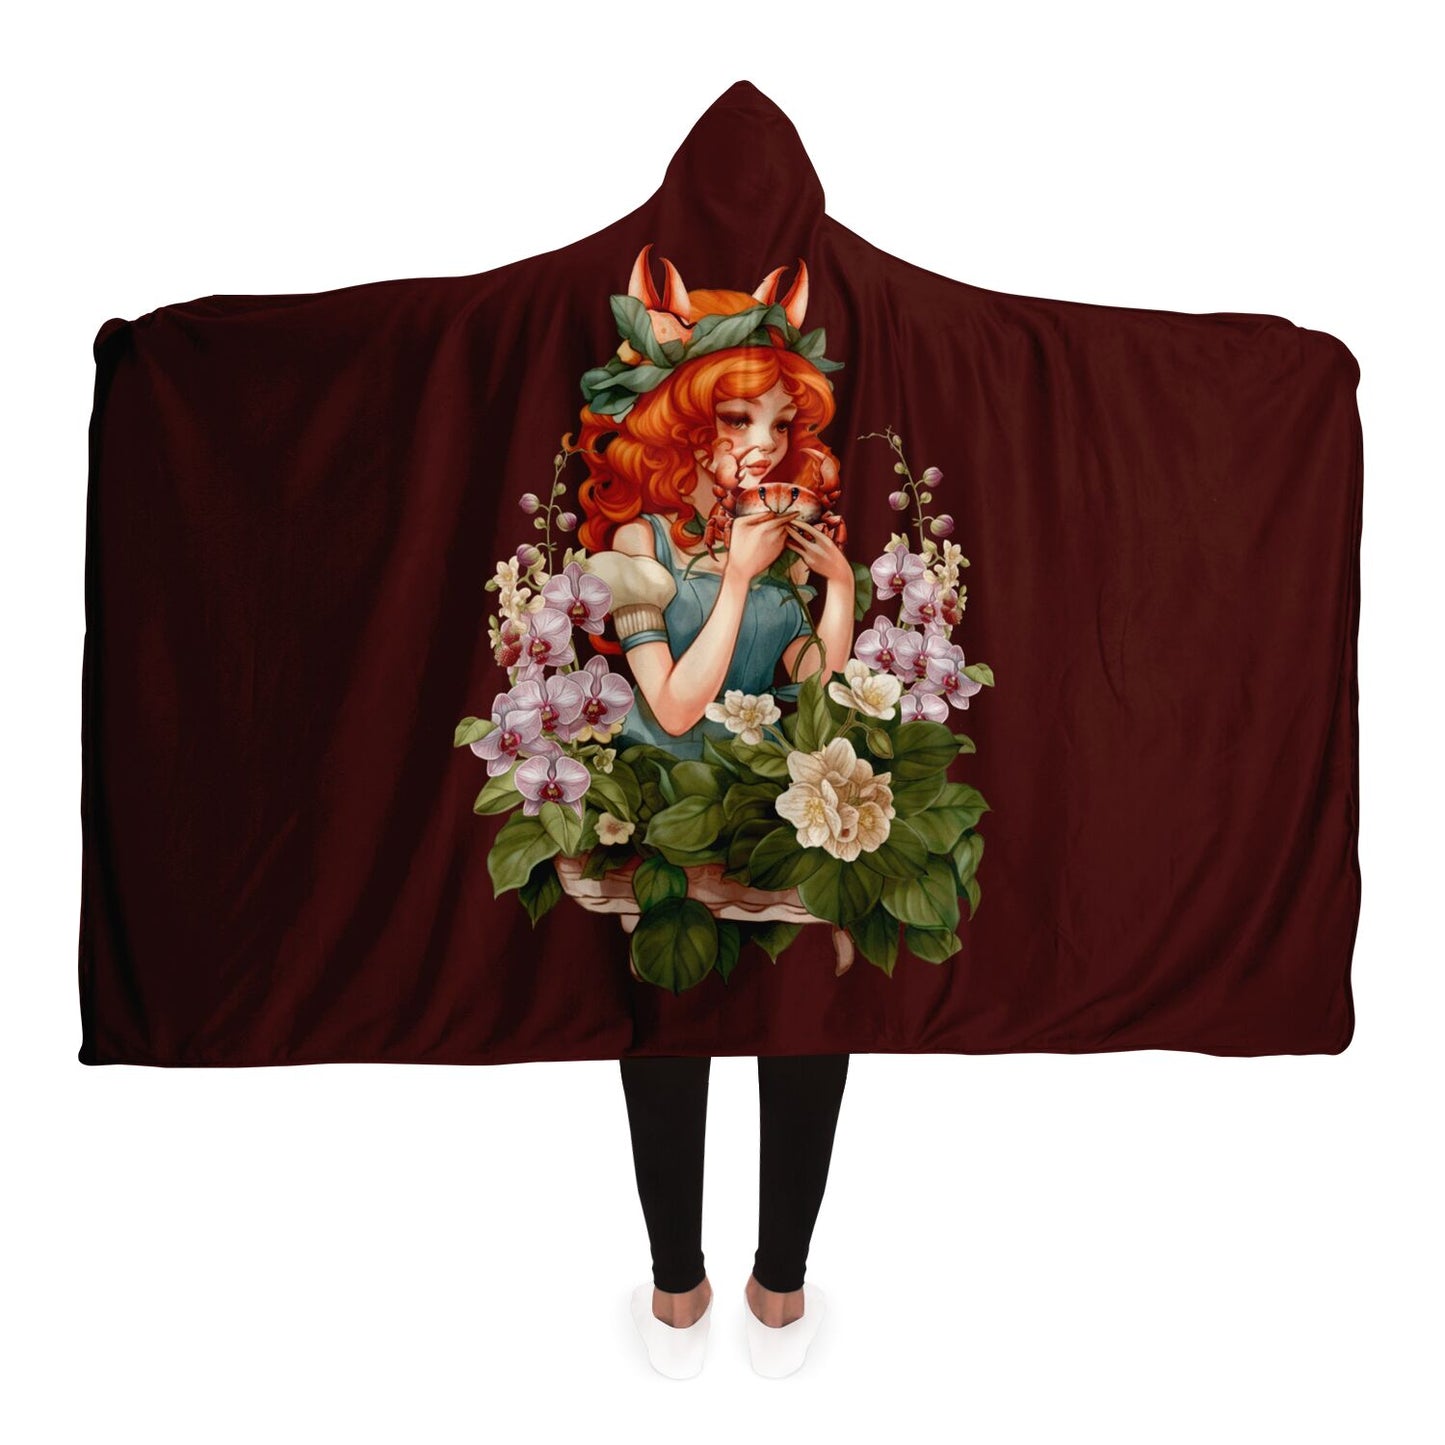 Cancarian Girl and Crab Vintage Illustration Hooded Blanket